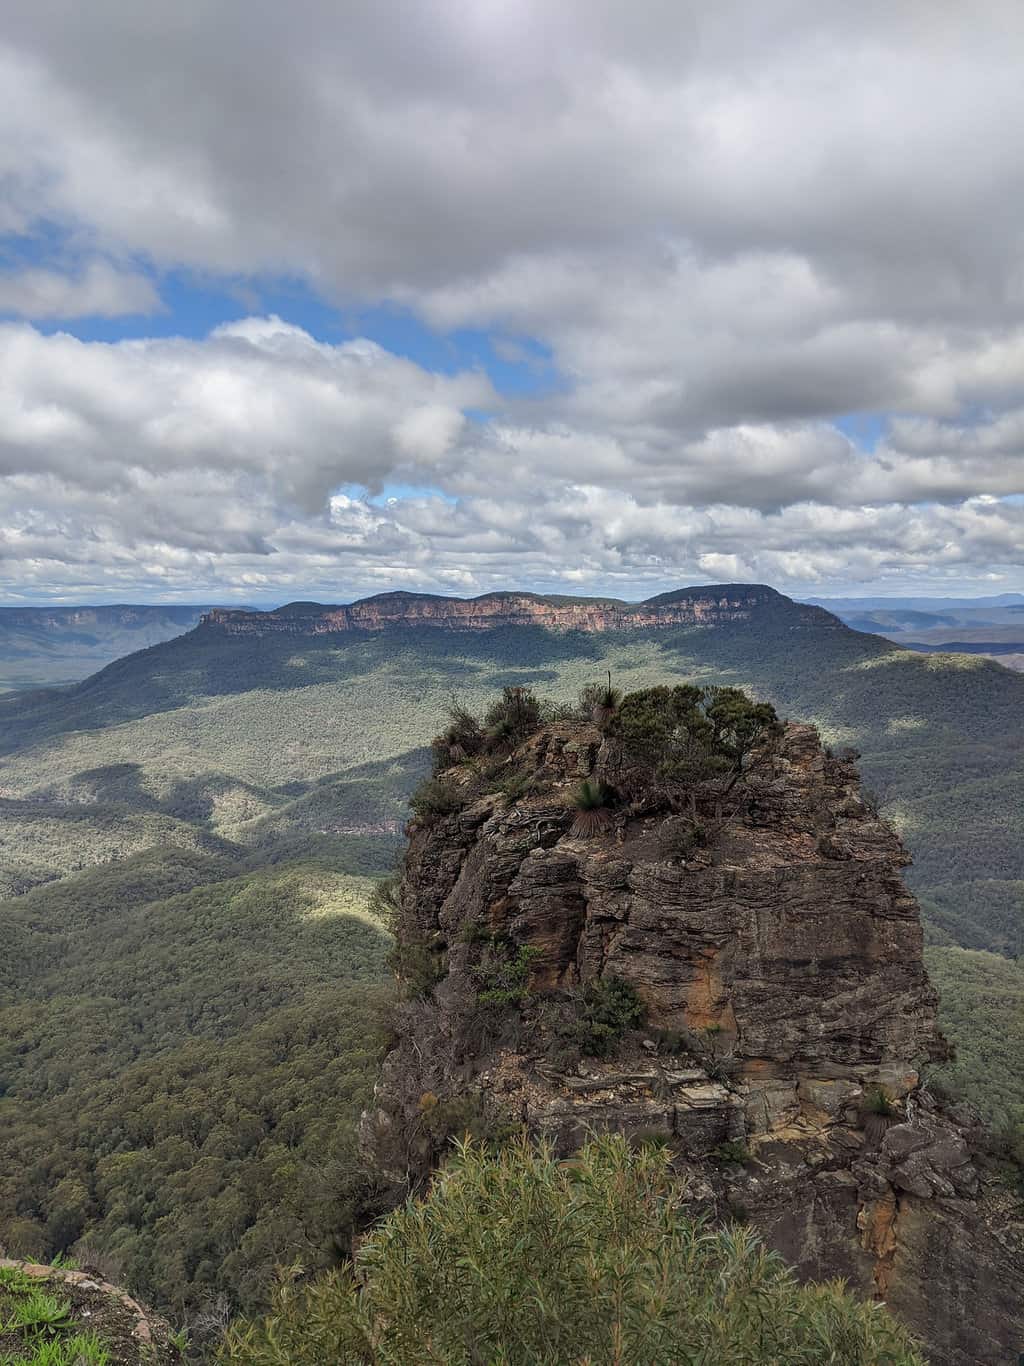 One of the Three Sisters rocks in the foreground, with the valley and mountain range in the background, in the Blue Mountains National Park